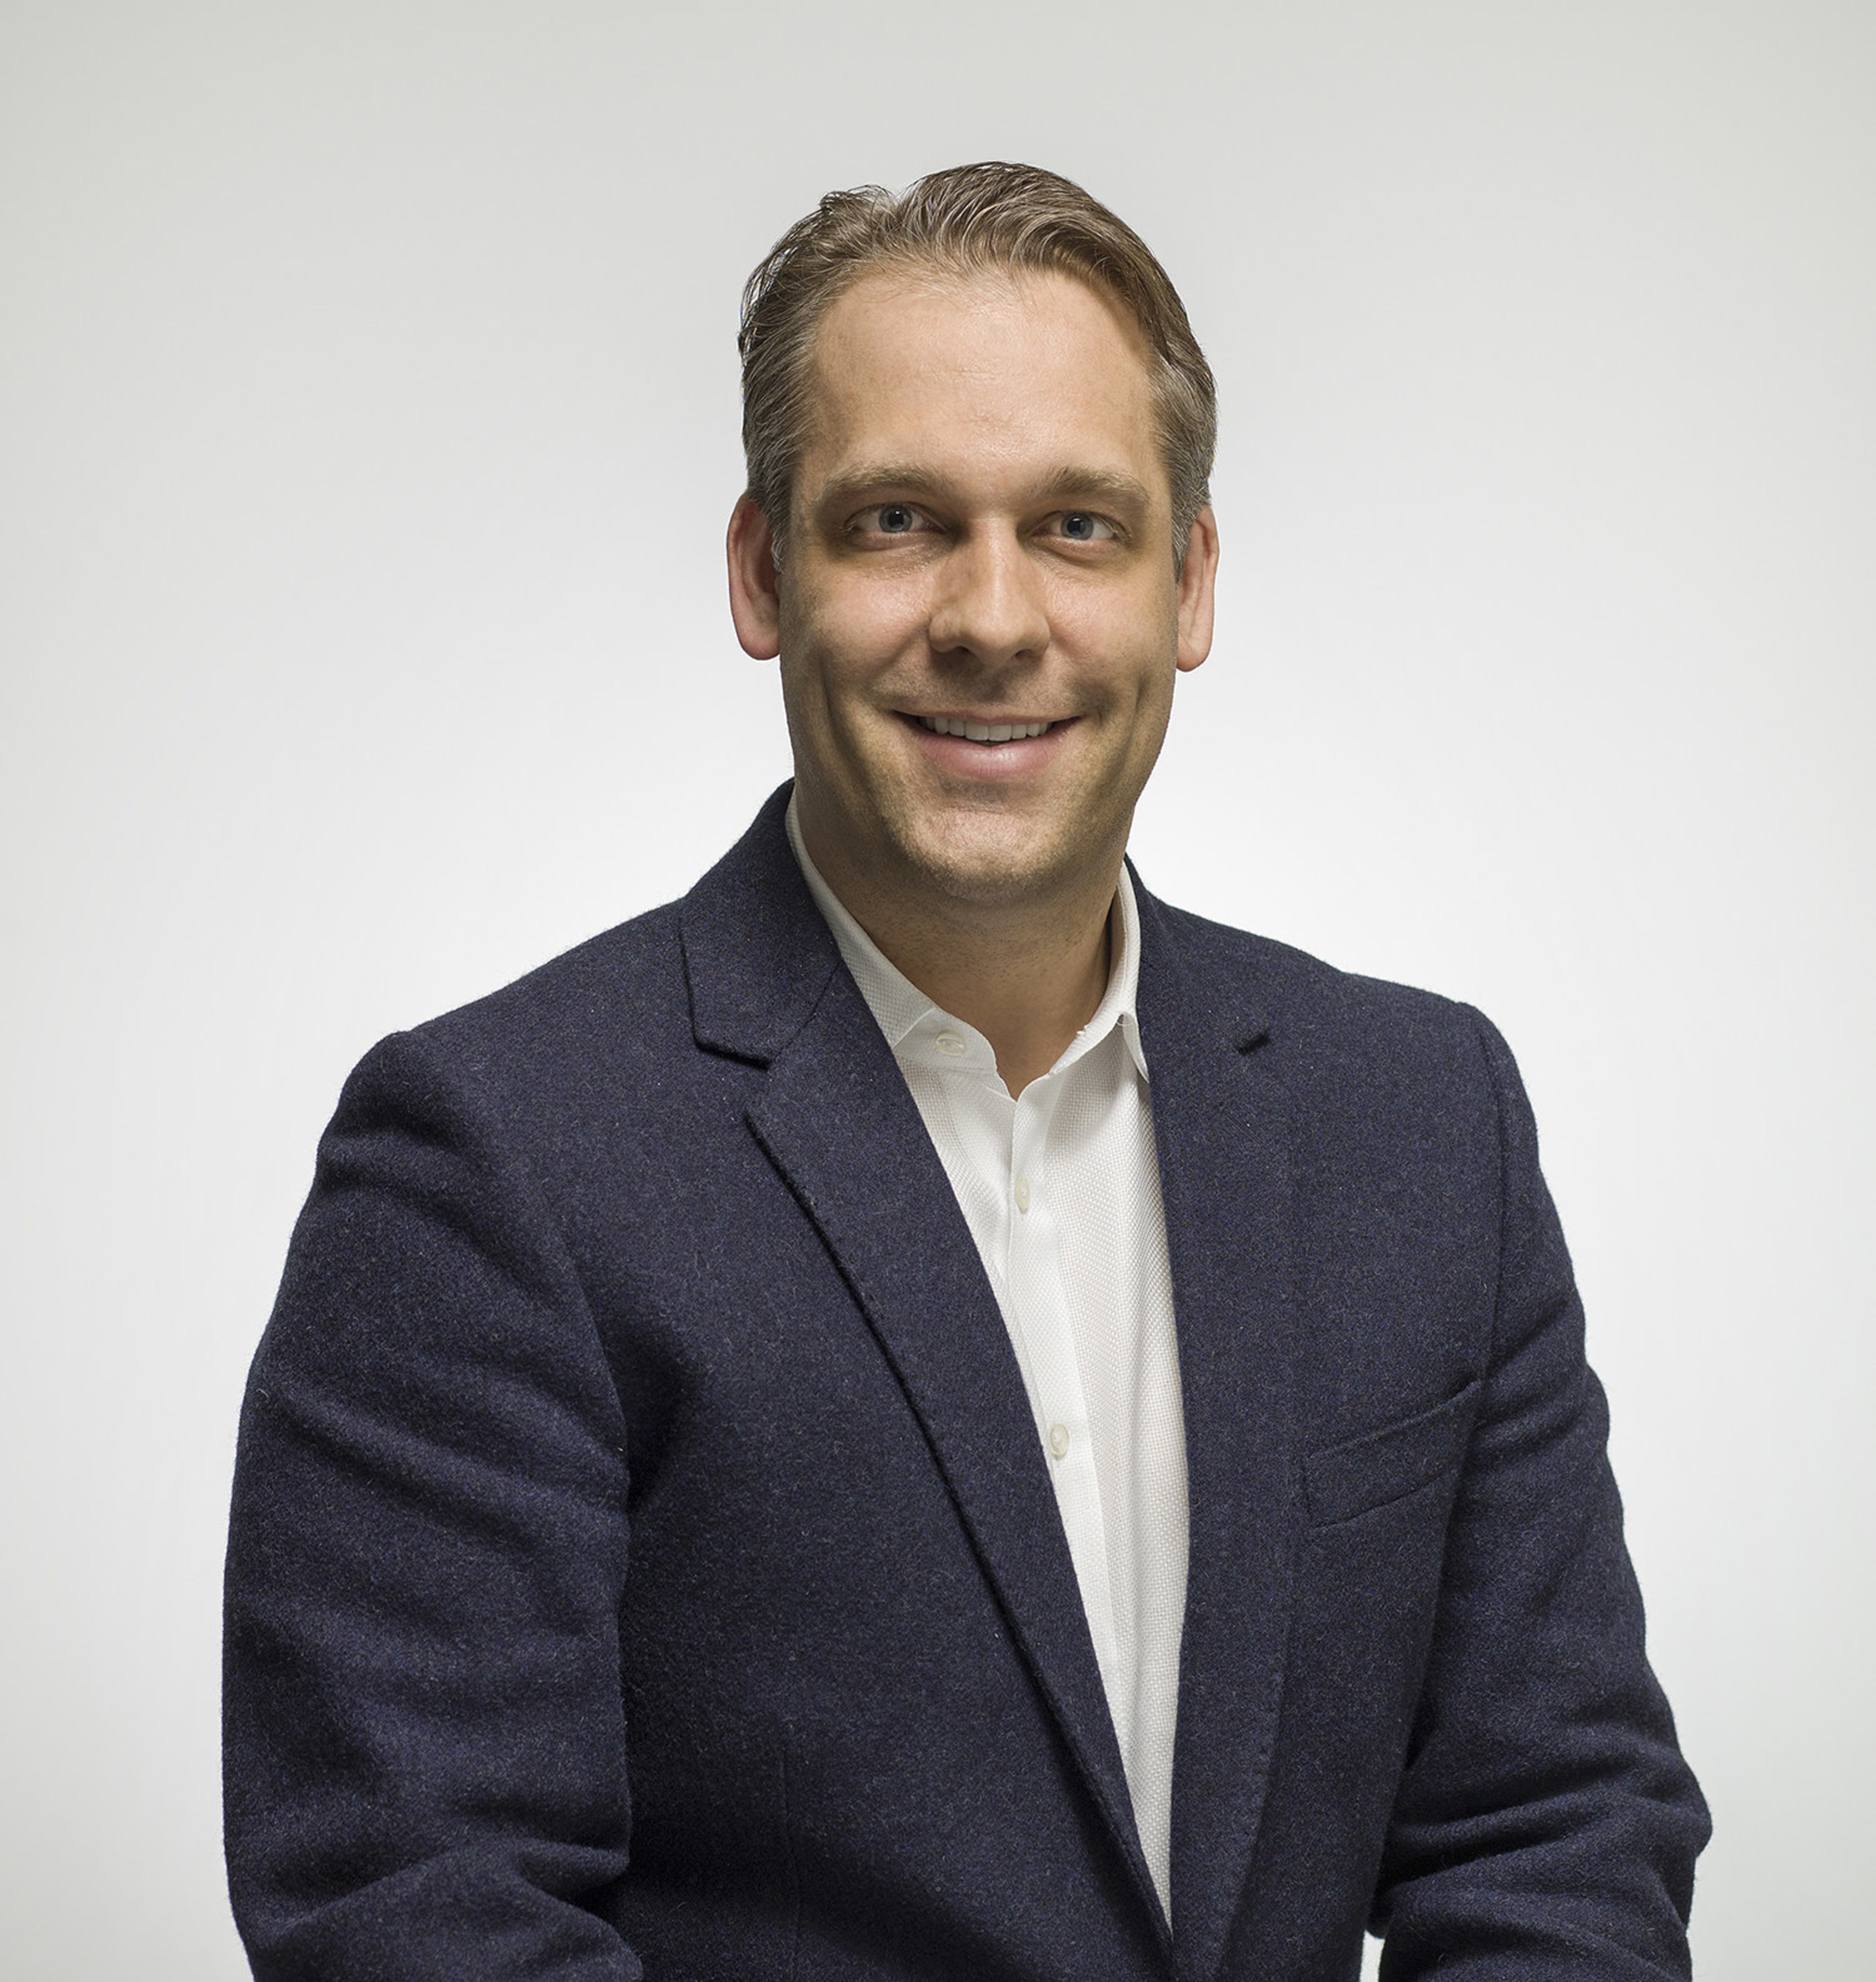 Bradley Charron was named Senior Vice President, General Manager for Sports & Active Nutrition. Brad will be responsible for developing and executing strategic growth plans for all the company's Sports & Active Nutrition brands, such as MET-Rx(R), Pure Protein(R), Body Fortress(R) and Balance Bar(R).